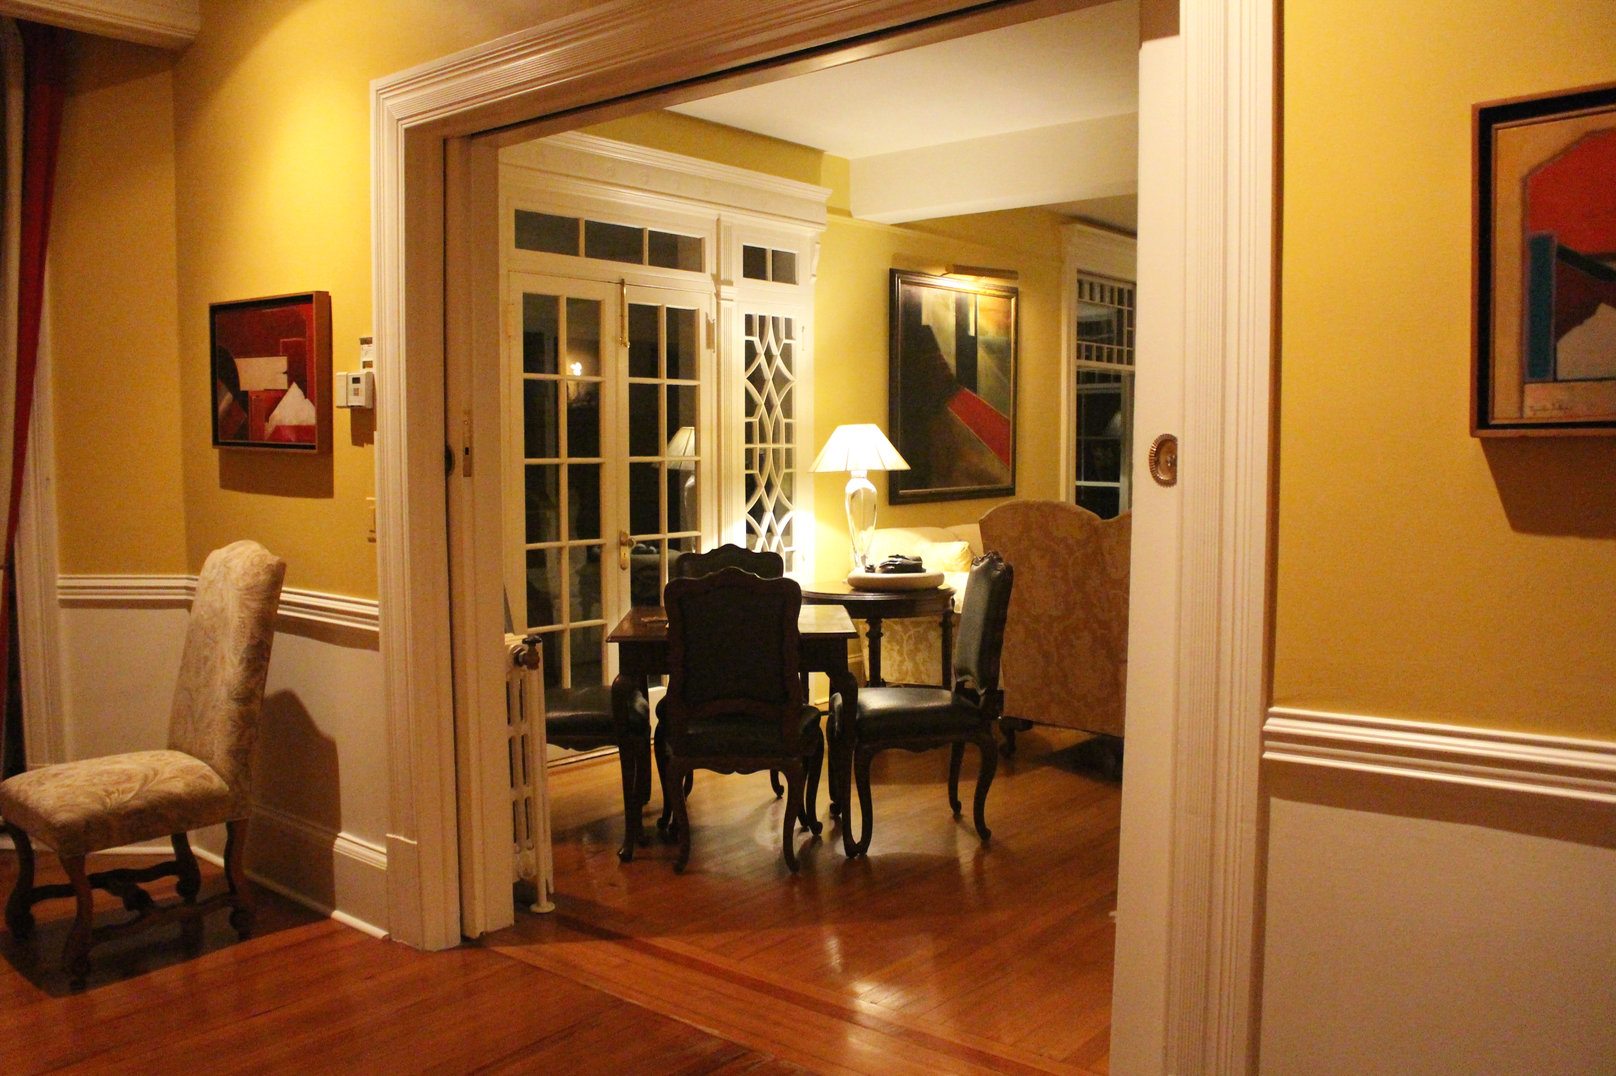 Pocket doors divide living room from dining room in the The John Sparks House. Photo: Leslie Yager